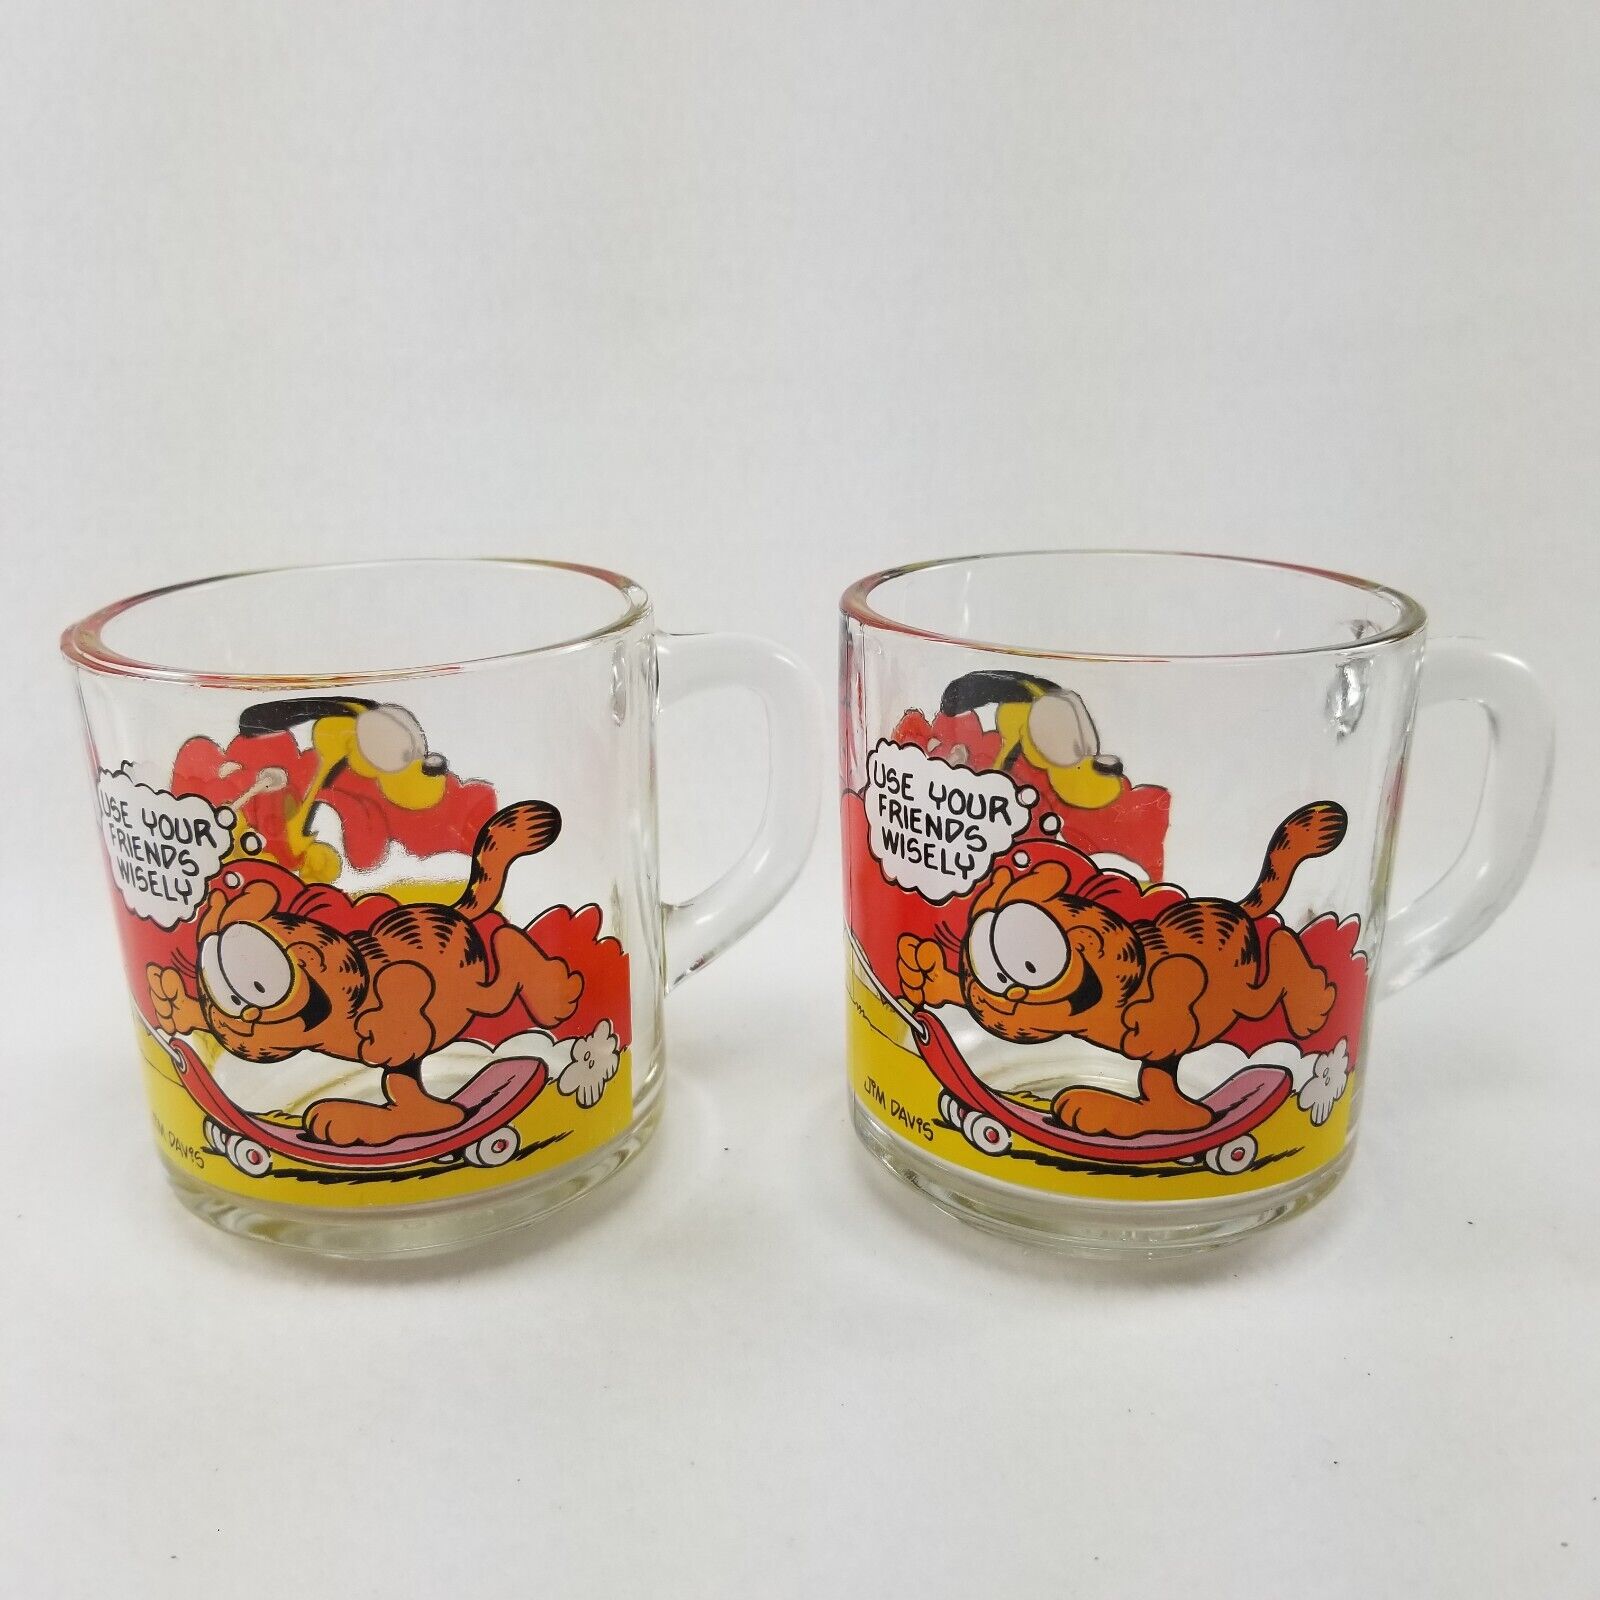 Garfield Oddie Glass Mug (2) Vtg 1978 Mcdonalds Use Your Friends Wisely  Cup Set